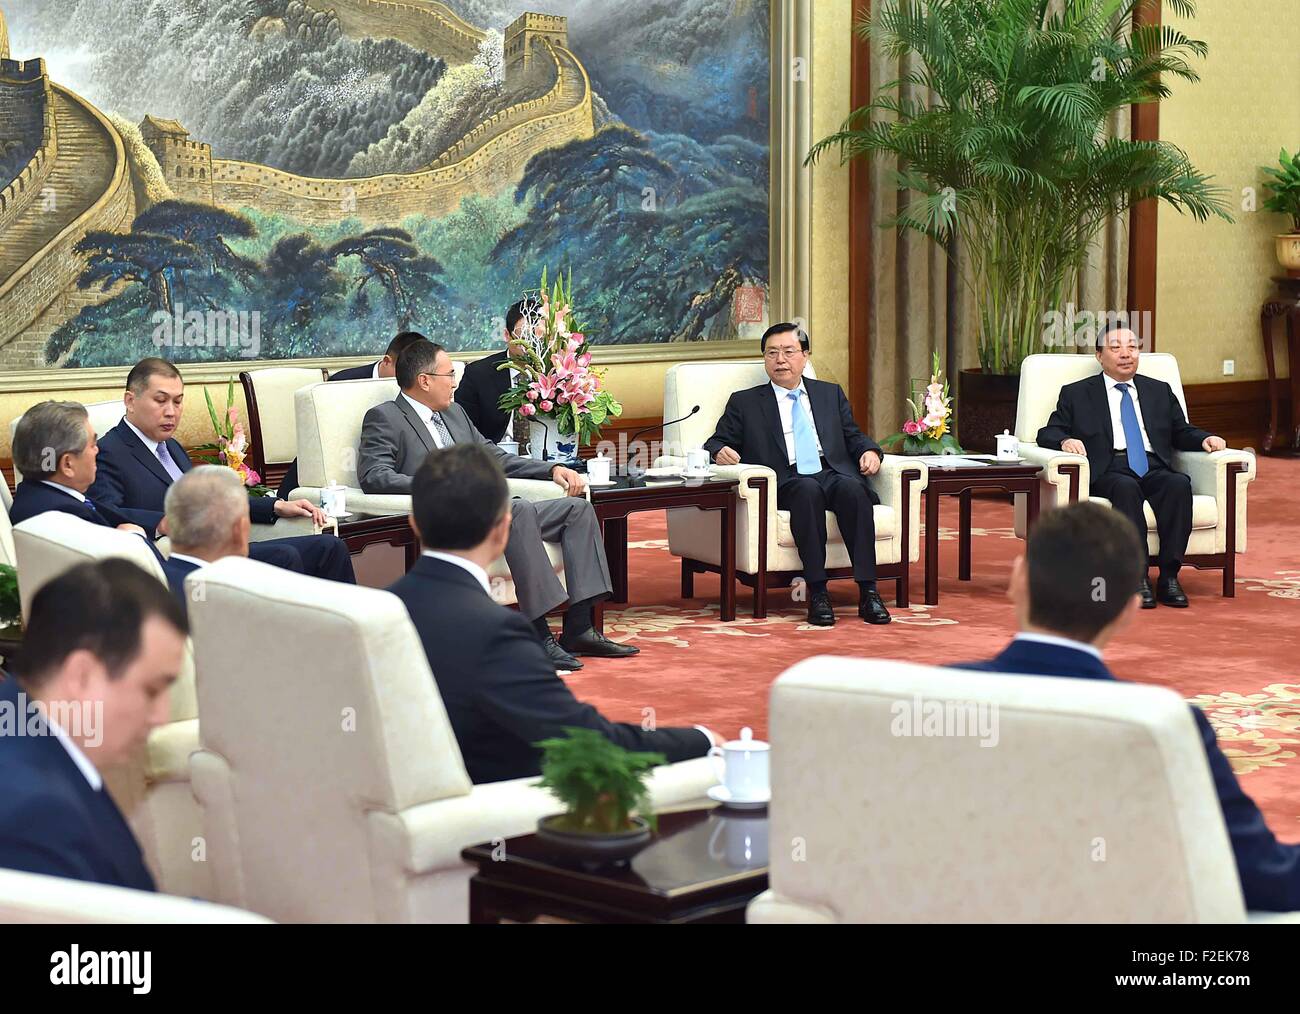 Beijing, China. 17th Sep, 2015. Zhang Dejiang (2nd R), chairman of the Standing Committee of China's National People's Congress (NPC), meets with a delegation from Kazakhstan's ruling Nur Otan Party, which is led by its First Deputy Chairman Askar Myrzakhmetov, at the Great Hall of the People in Beijing, capital of China, Sept. 17, 2015. © Li Tao/Xinhua/Alamy Live News Stock Photo